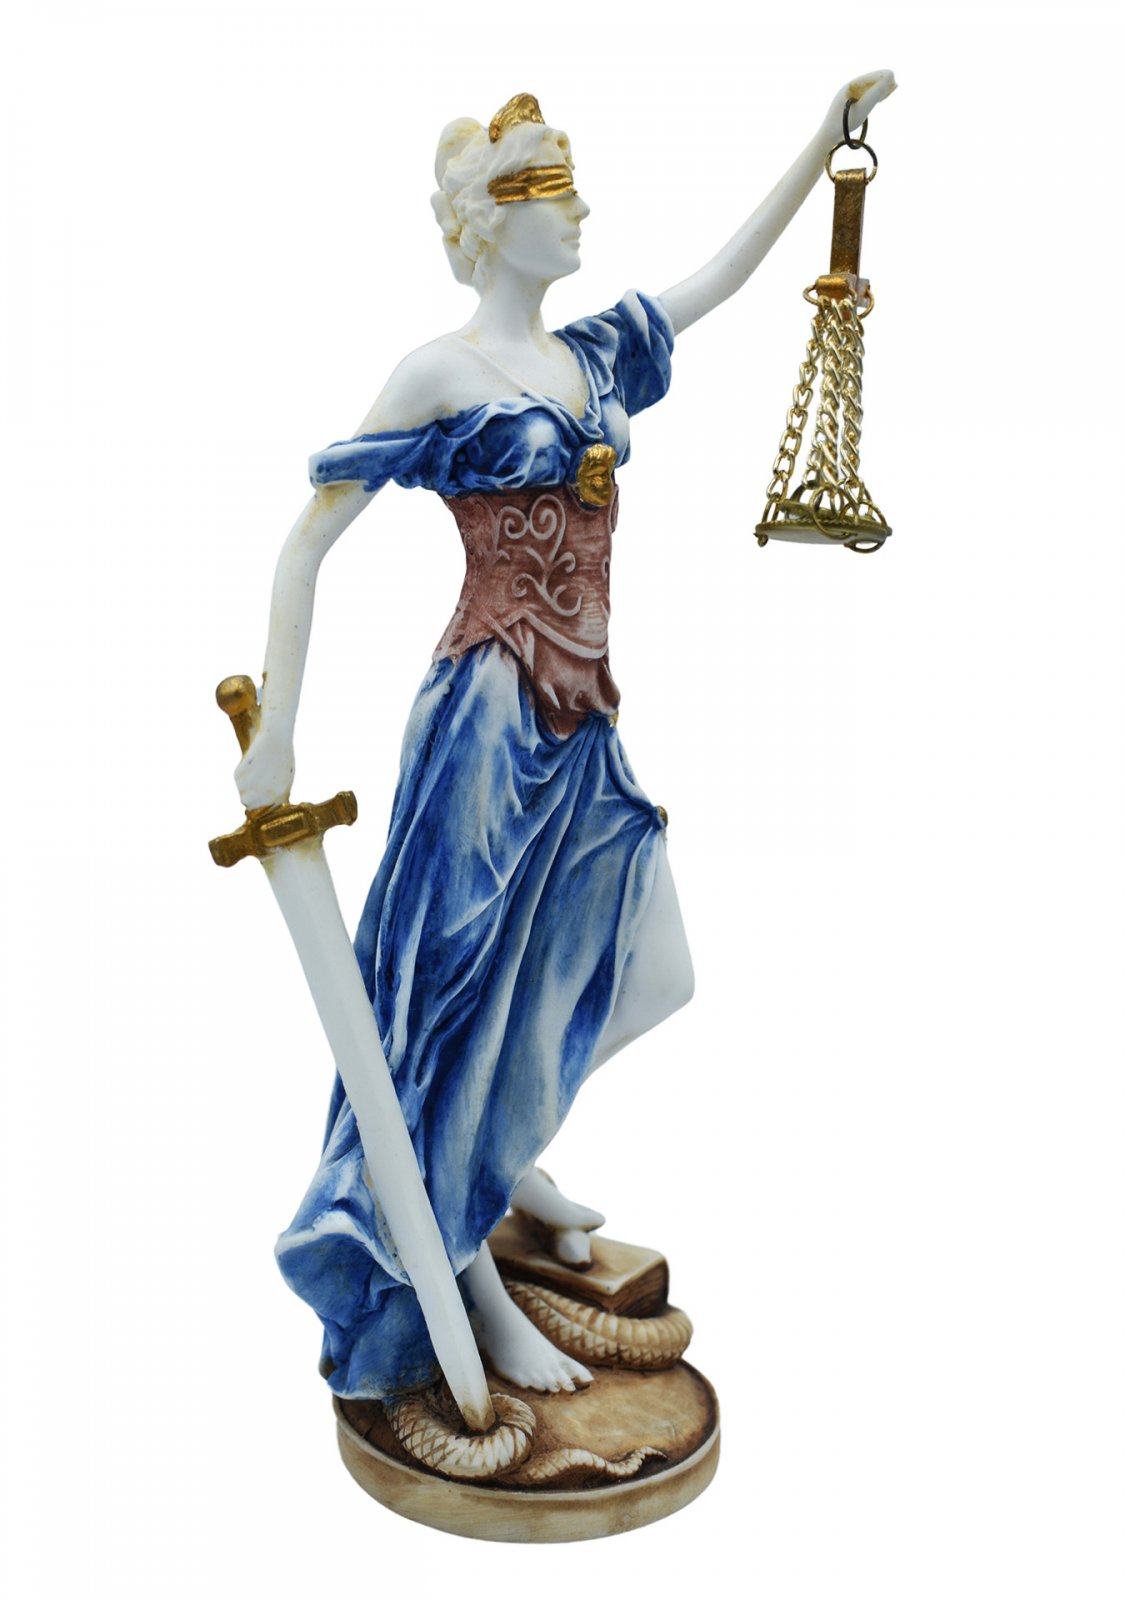 Themis, the greek goddess of justice, alabaster statue